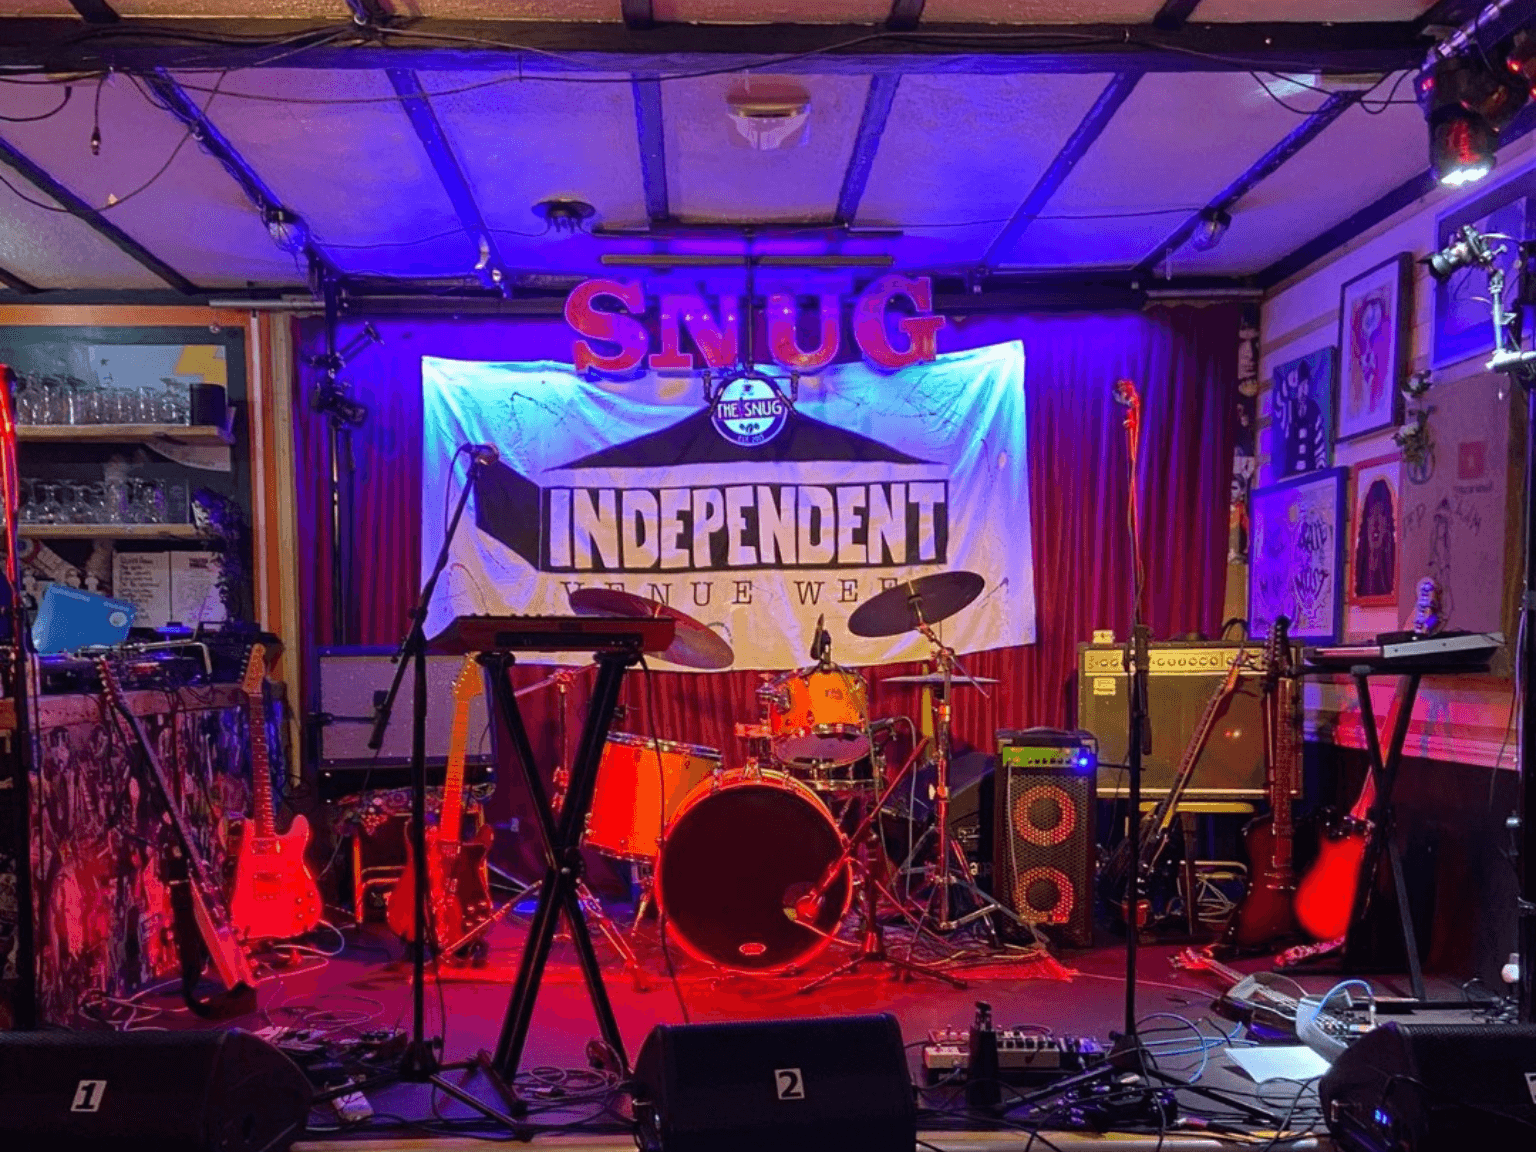 The Snug stage and Independent venues week